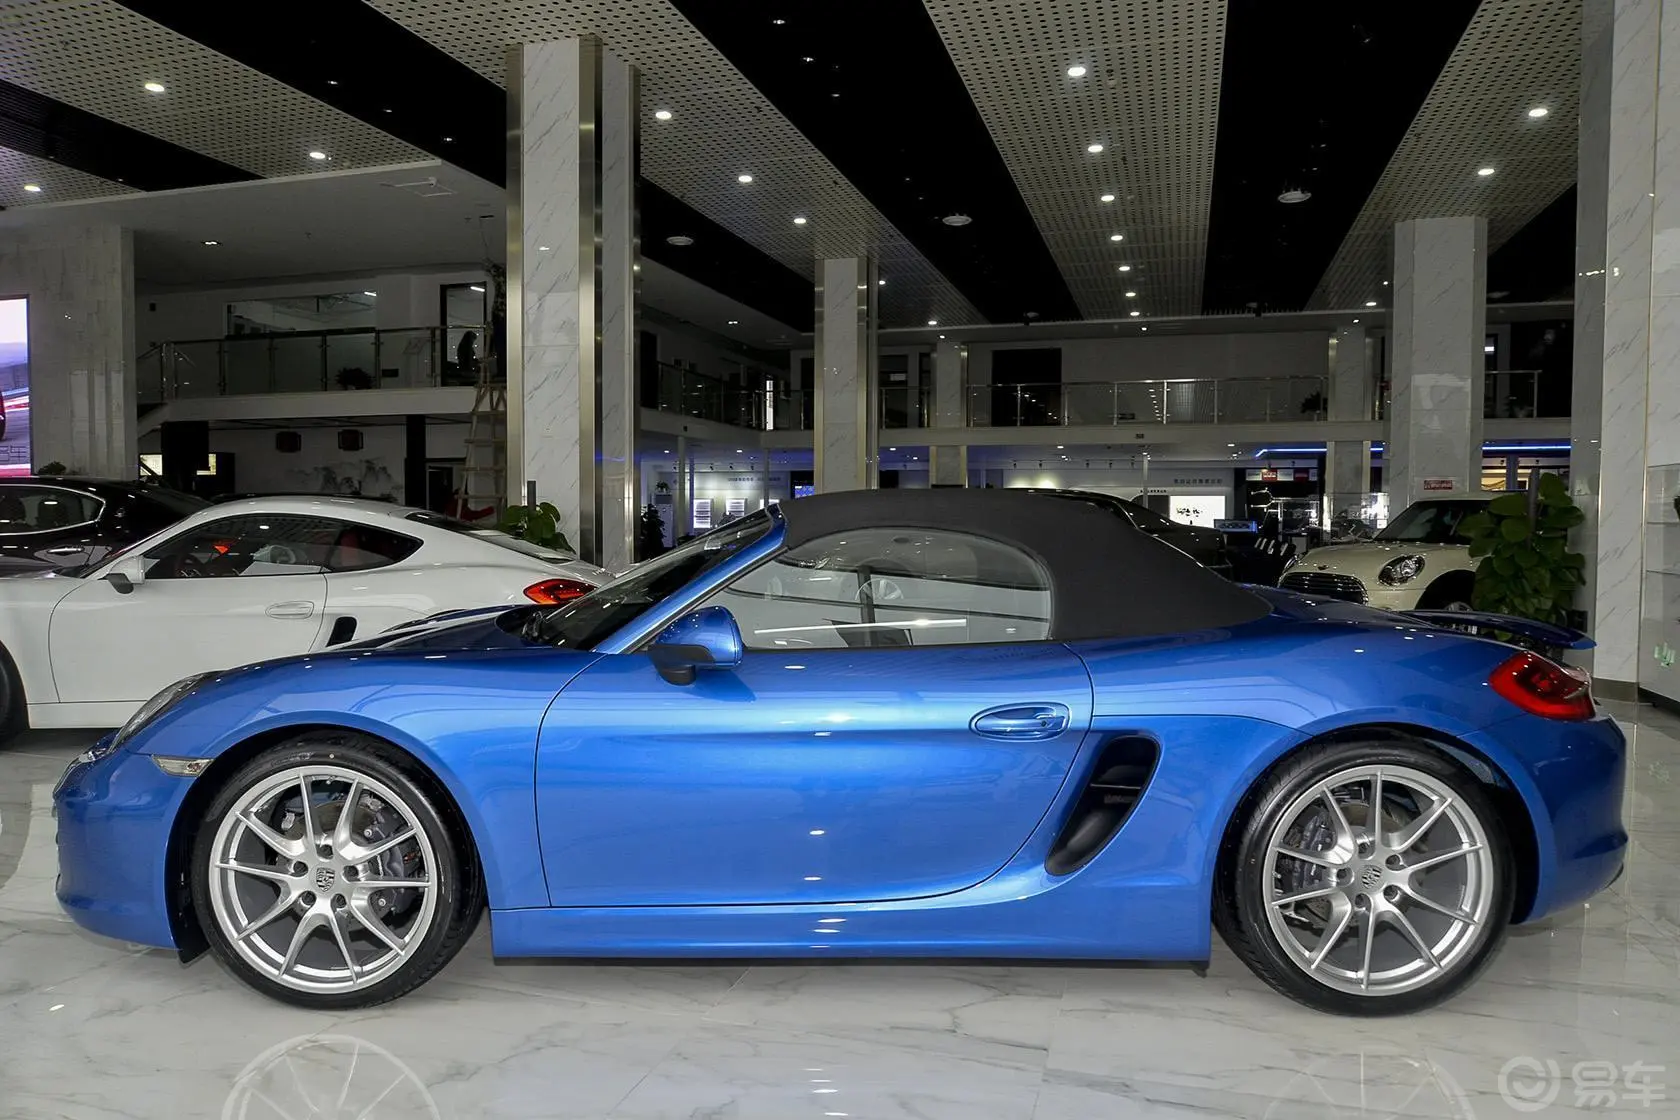 BoxsterBoxster 2.7 Style Edition侧前45度车头向左水平